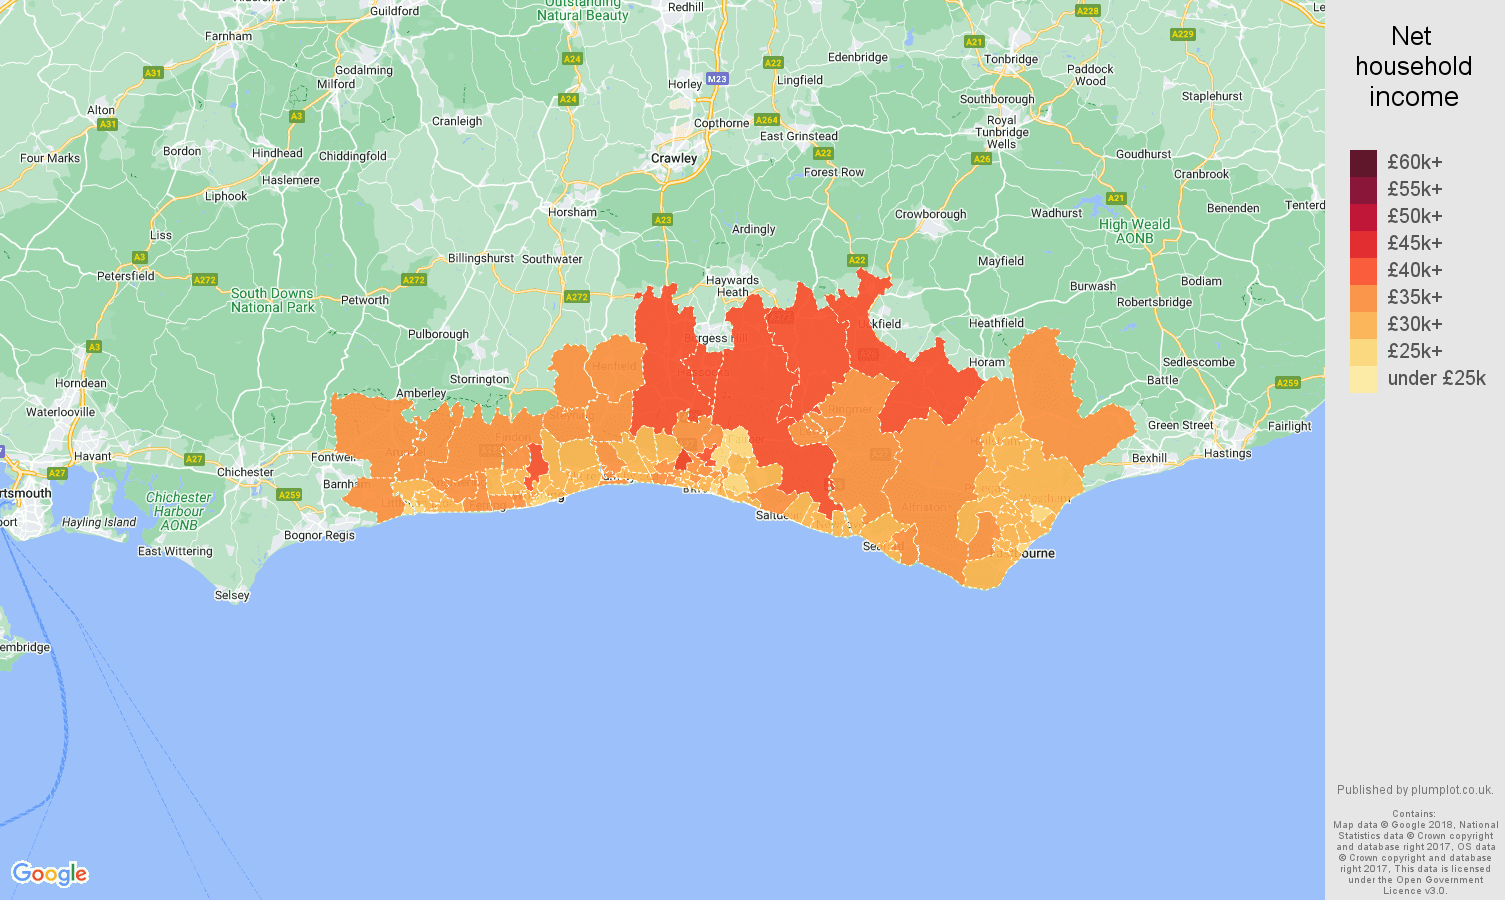 Brighton net household income map